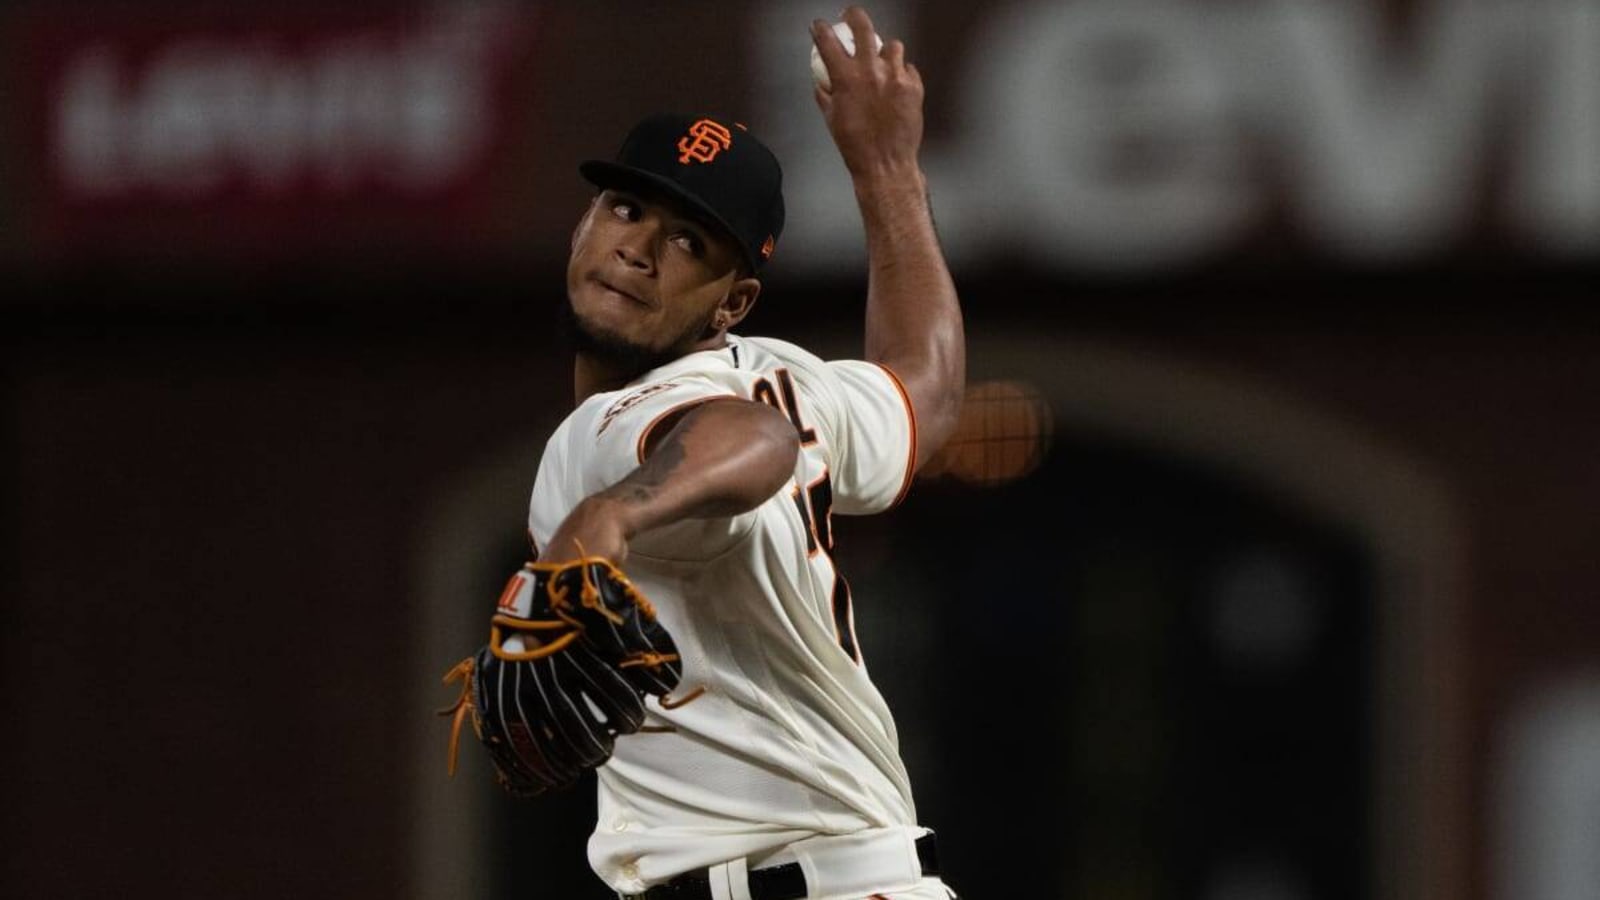  Giants closer Camilo Doval named NL Reliever of the Month